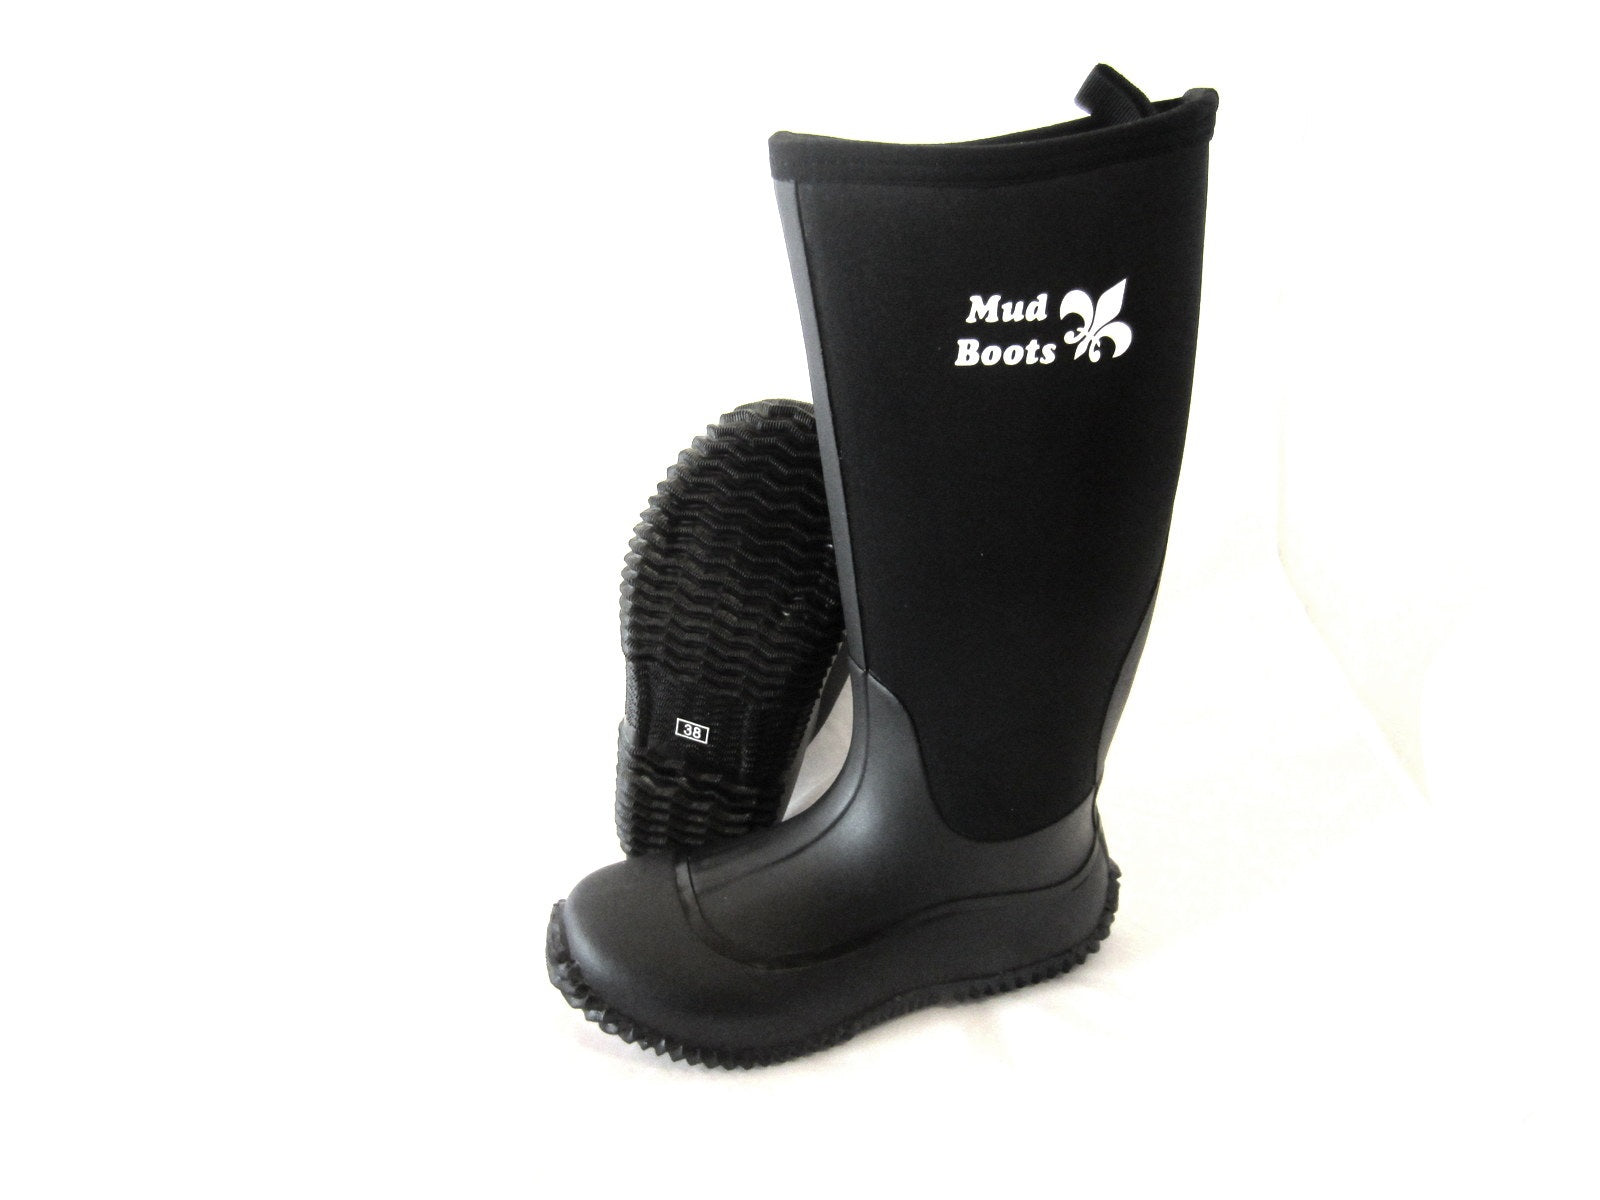 Mud Boot - neoprene boots, rubber boots, knee high